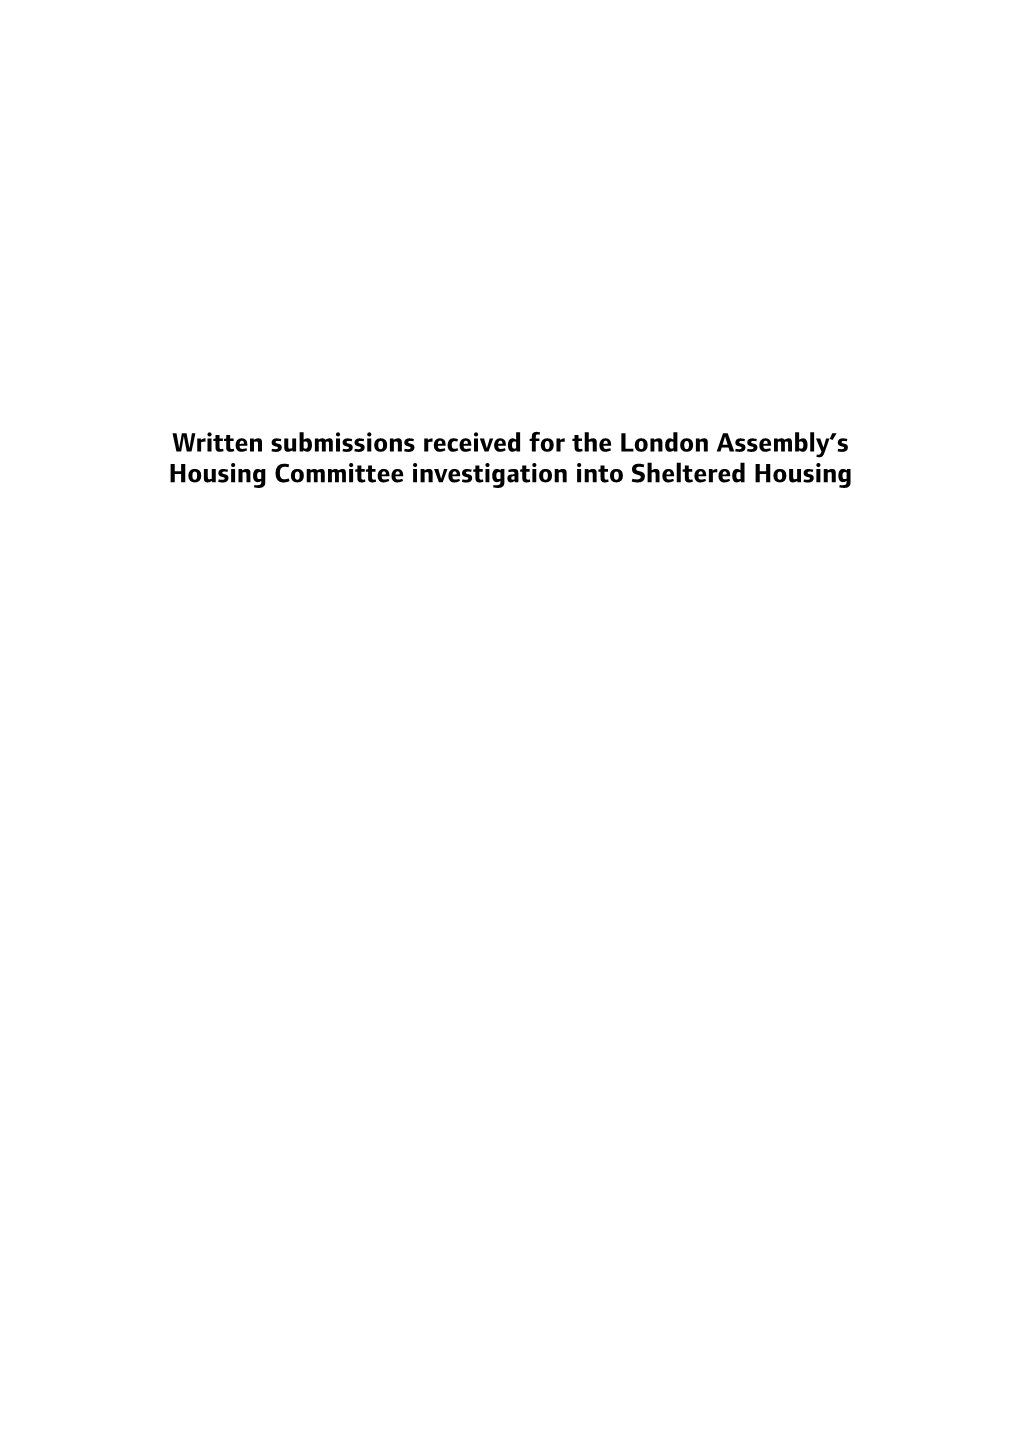 Written Submissions Received for the London Assembly's Housing